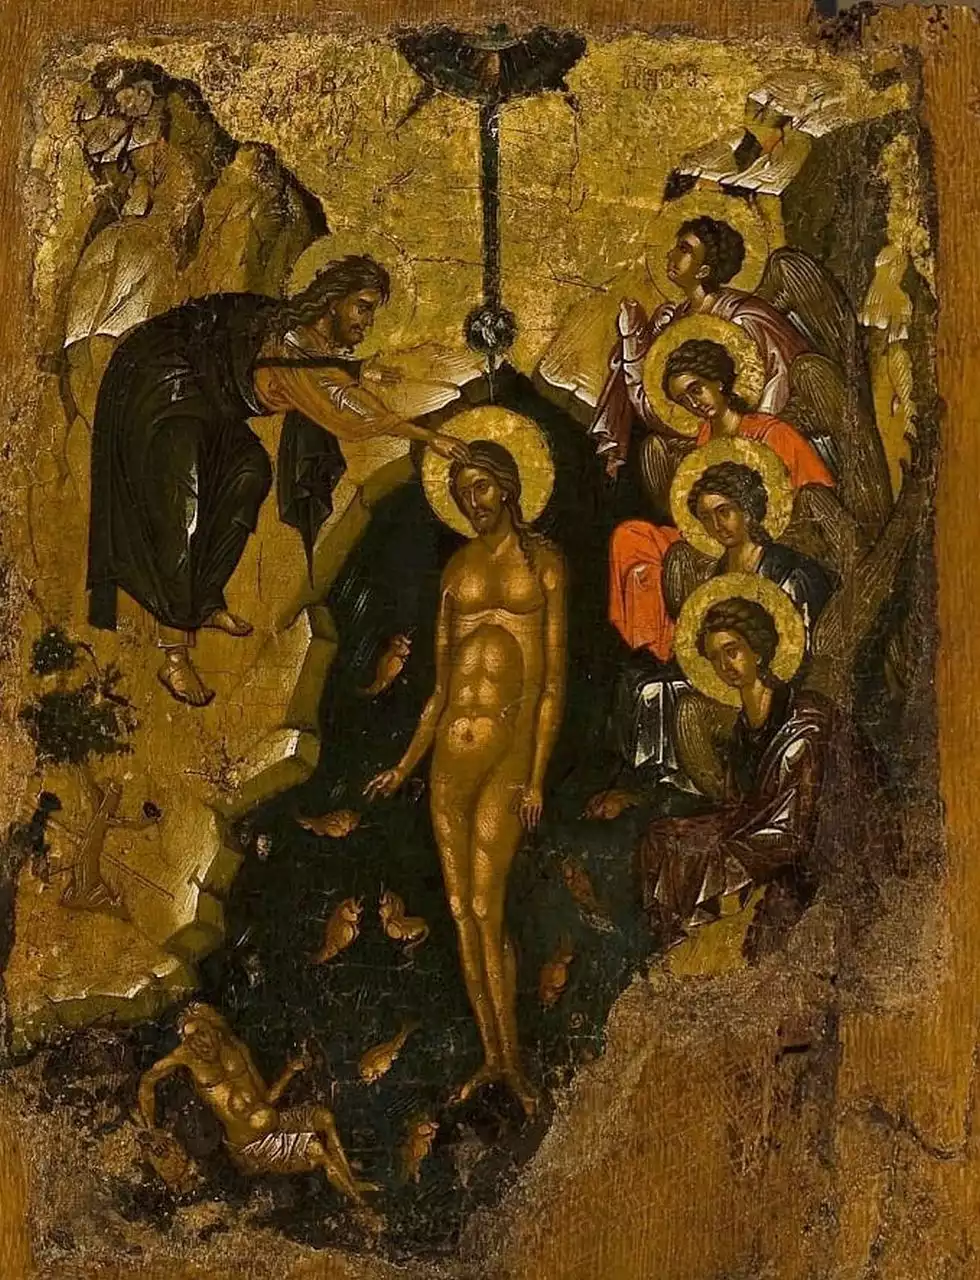 This gold-leafed icon is an amazing baptismal gifts idea as it shows the Baptism of Christ.